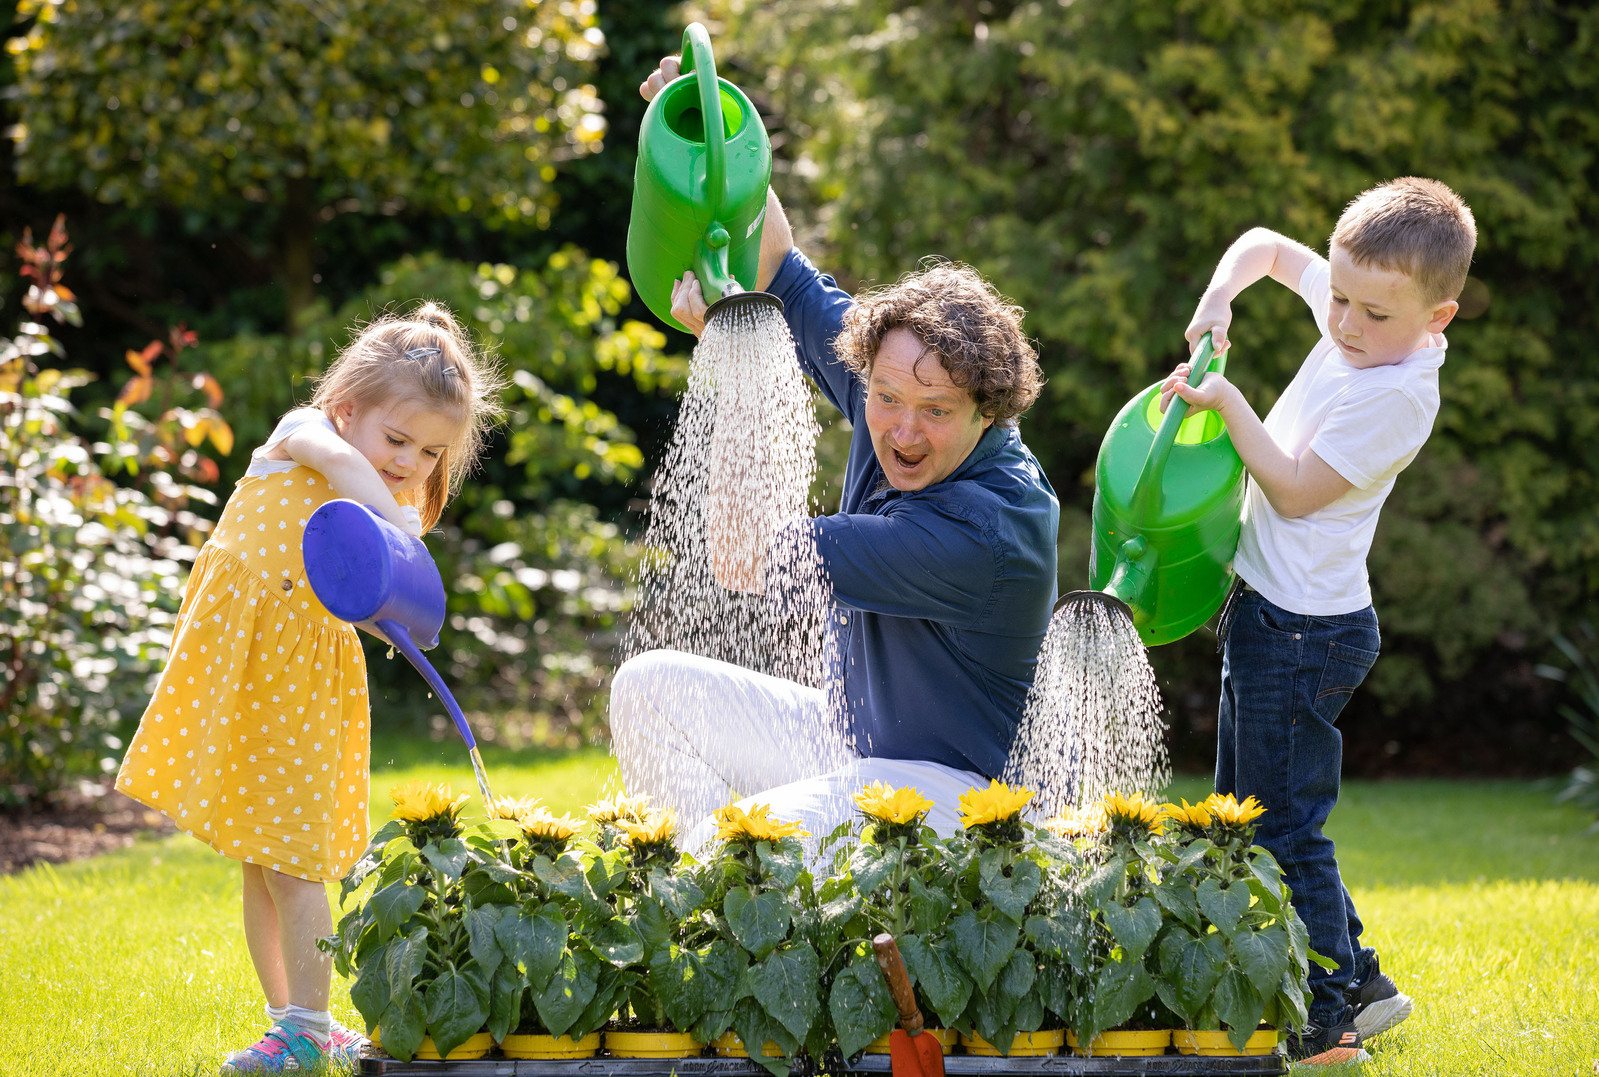 Irish garden designer and television personality Diarmuid Gavin pouring water from a watering can with two children at a Press PR Photocall for Irish Hospice Sunflower Appeal